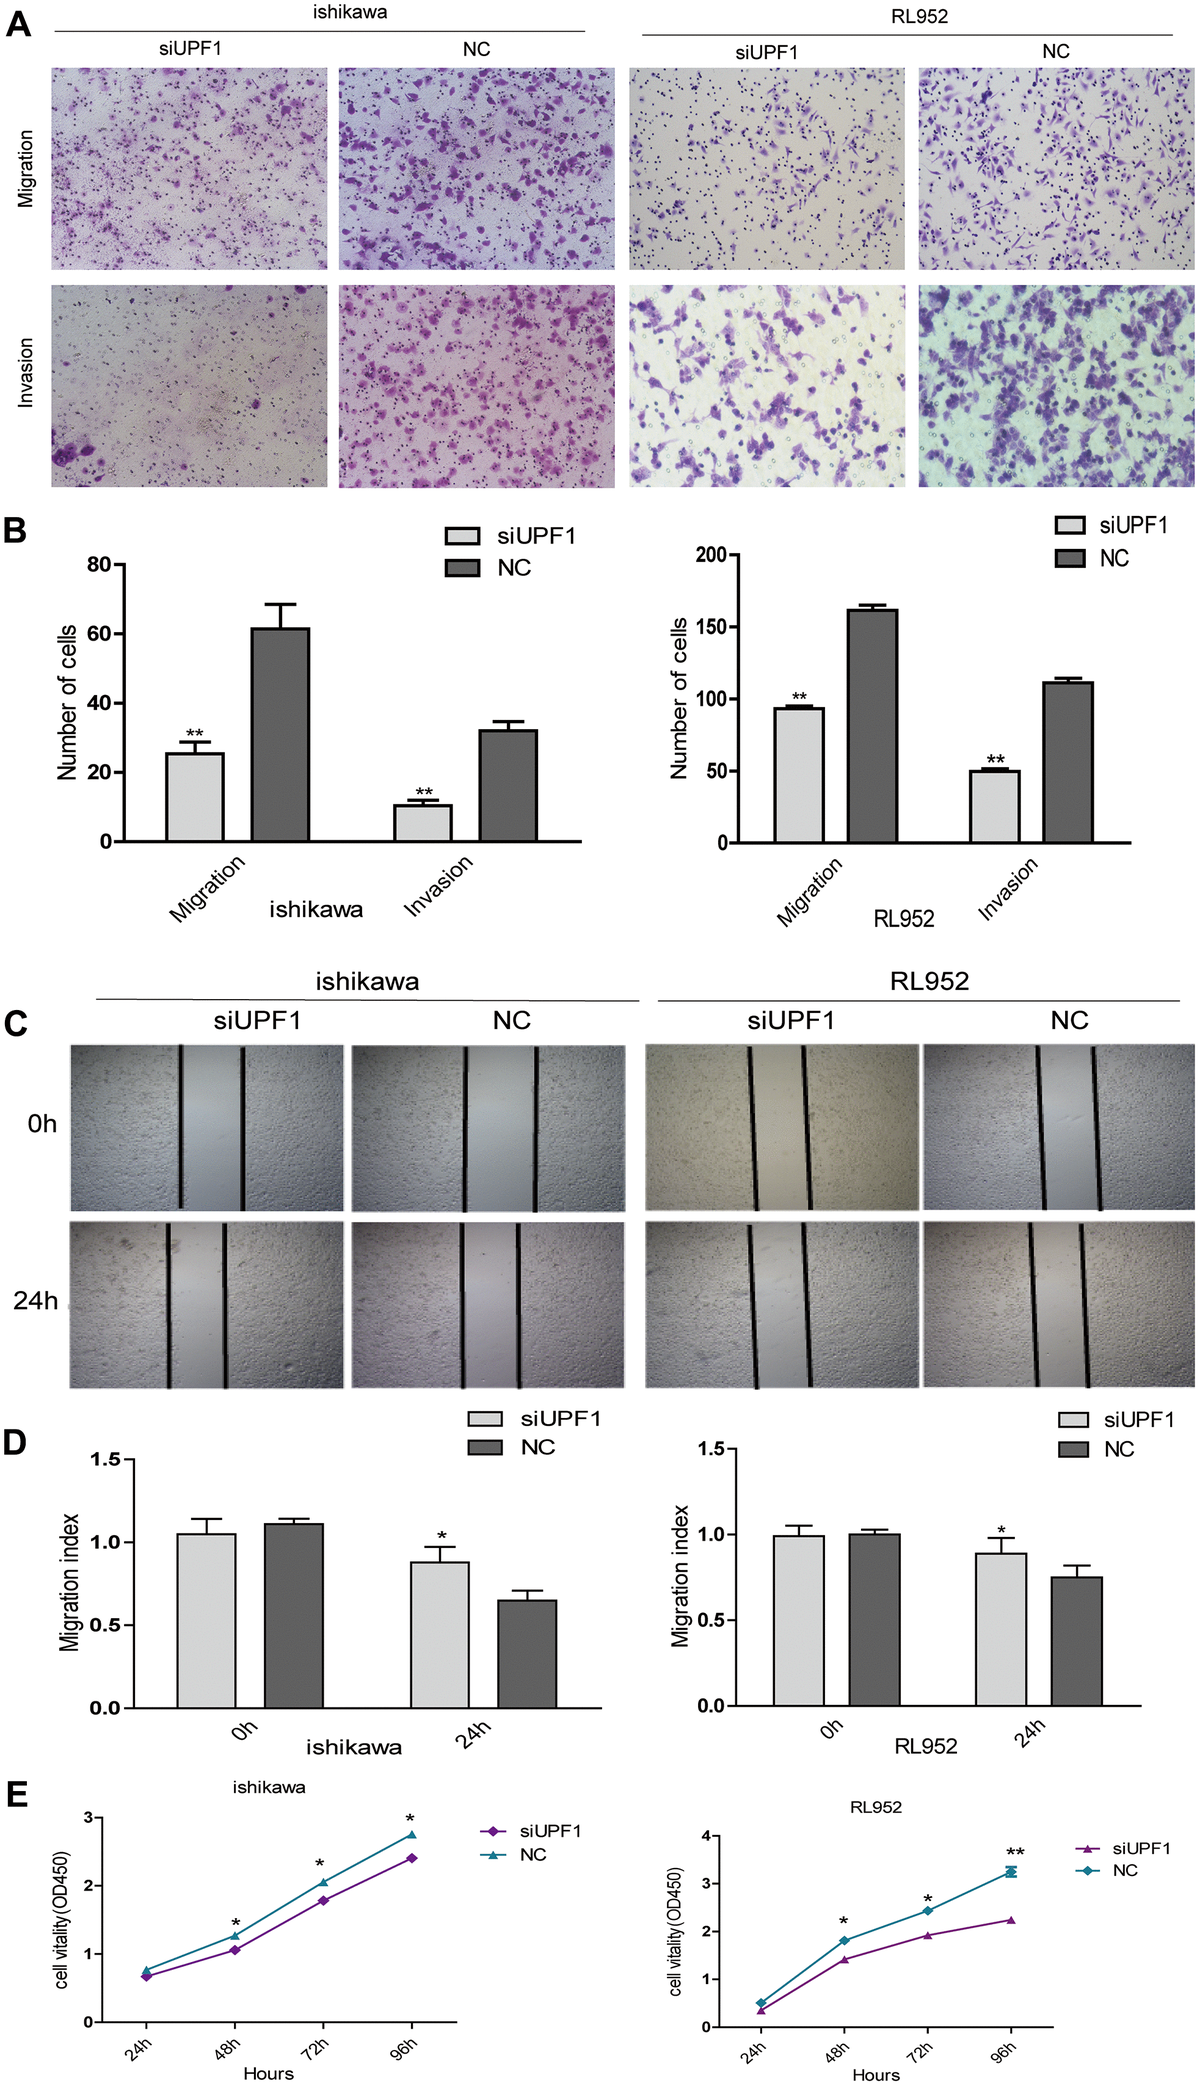 The effect of UPF1 on cell migration, invasion and proliferation in Ishikawa and RL952 EEC cells. (A, B) Migration and invasion assay in Ishikawa and RL952 cells that were transfected with siUPF1 and NC. Cells were evaluated at 24h after transfection(NIKON,100X). The results are shown as the mean±SEM from two independent experiments(**PC, D) Wound healing assay showing cell migration in Ishikawa and RL952 cells(*pE) CCK8 assay showing cell proliferation in Ishikawa and RL952 that were transfected with siUPF1 and NC(*p